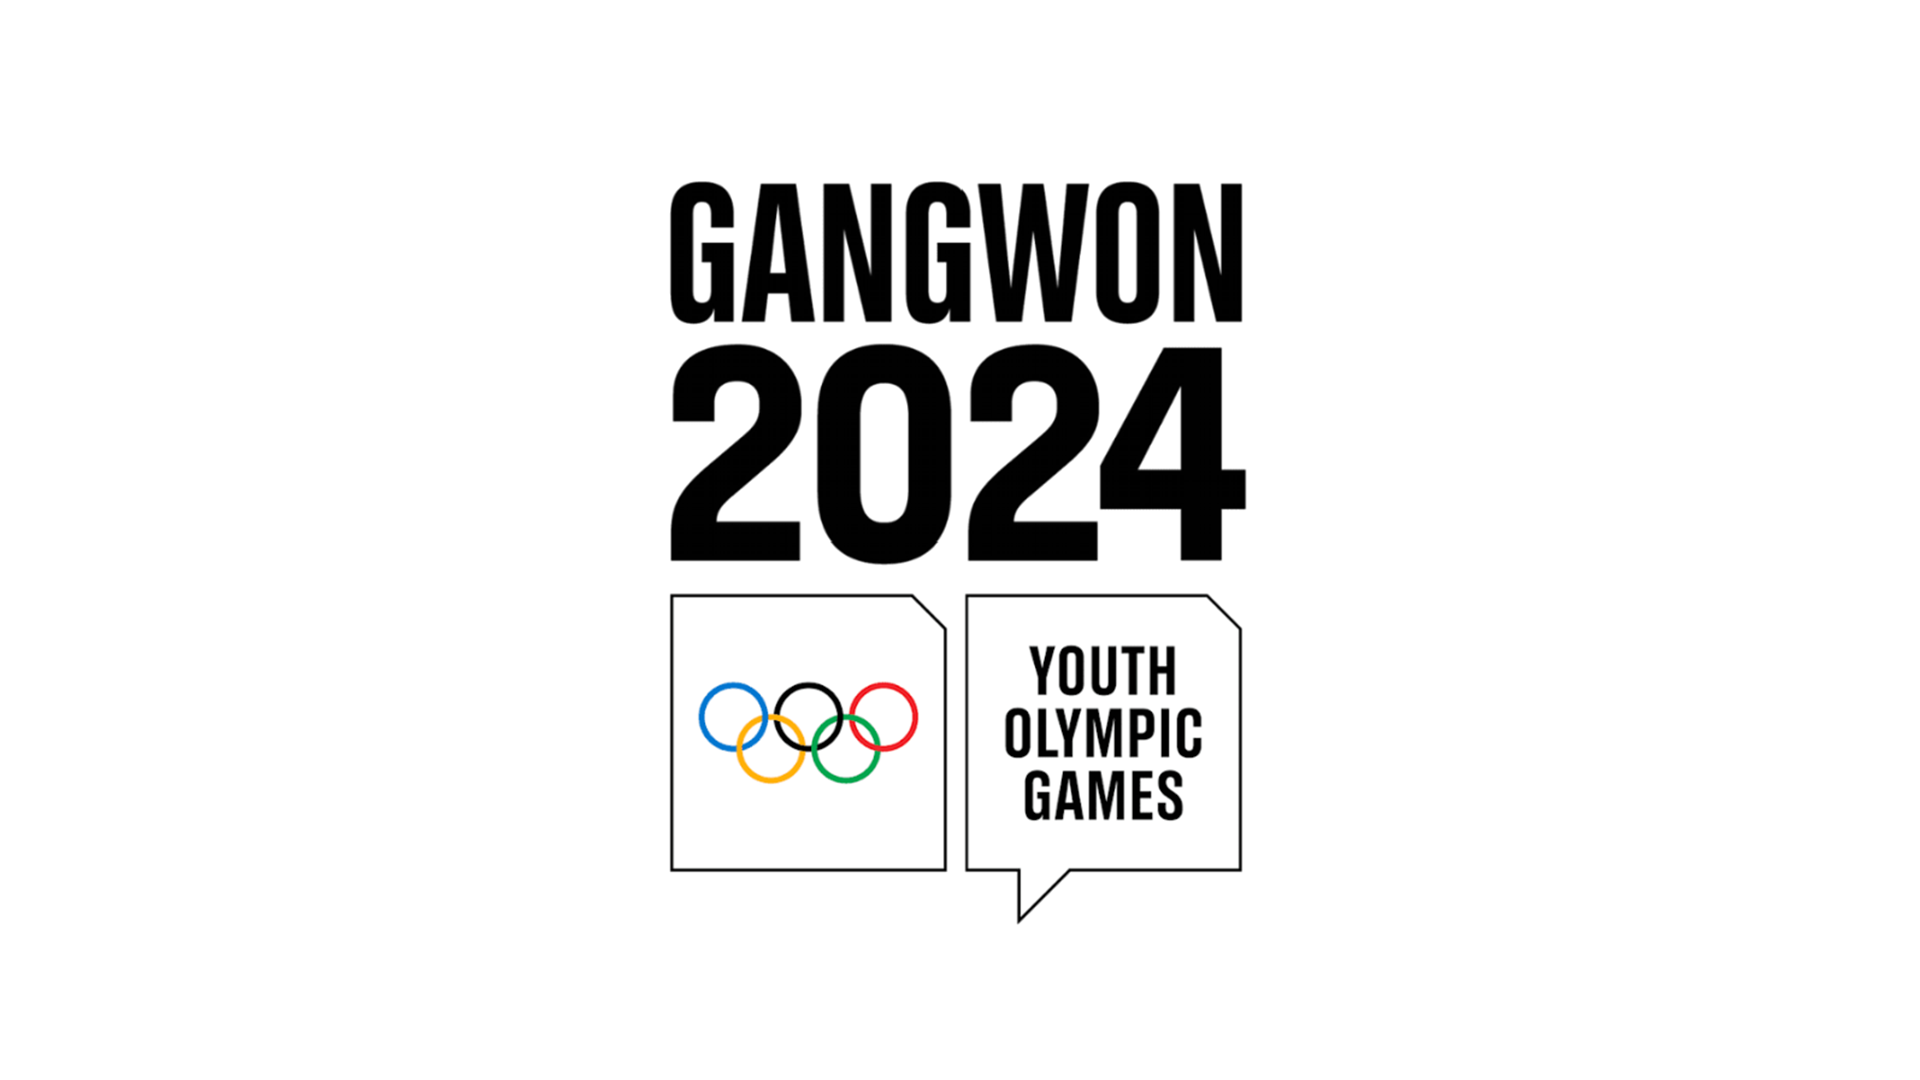 Winter Youth Olympic Games Gangwon 2024